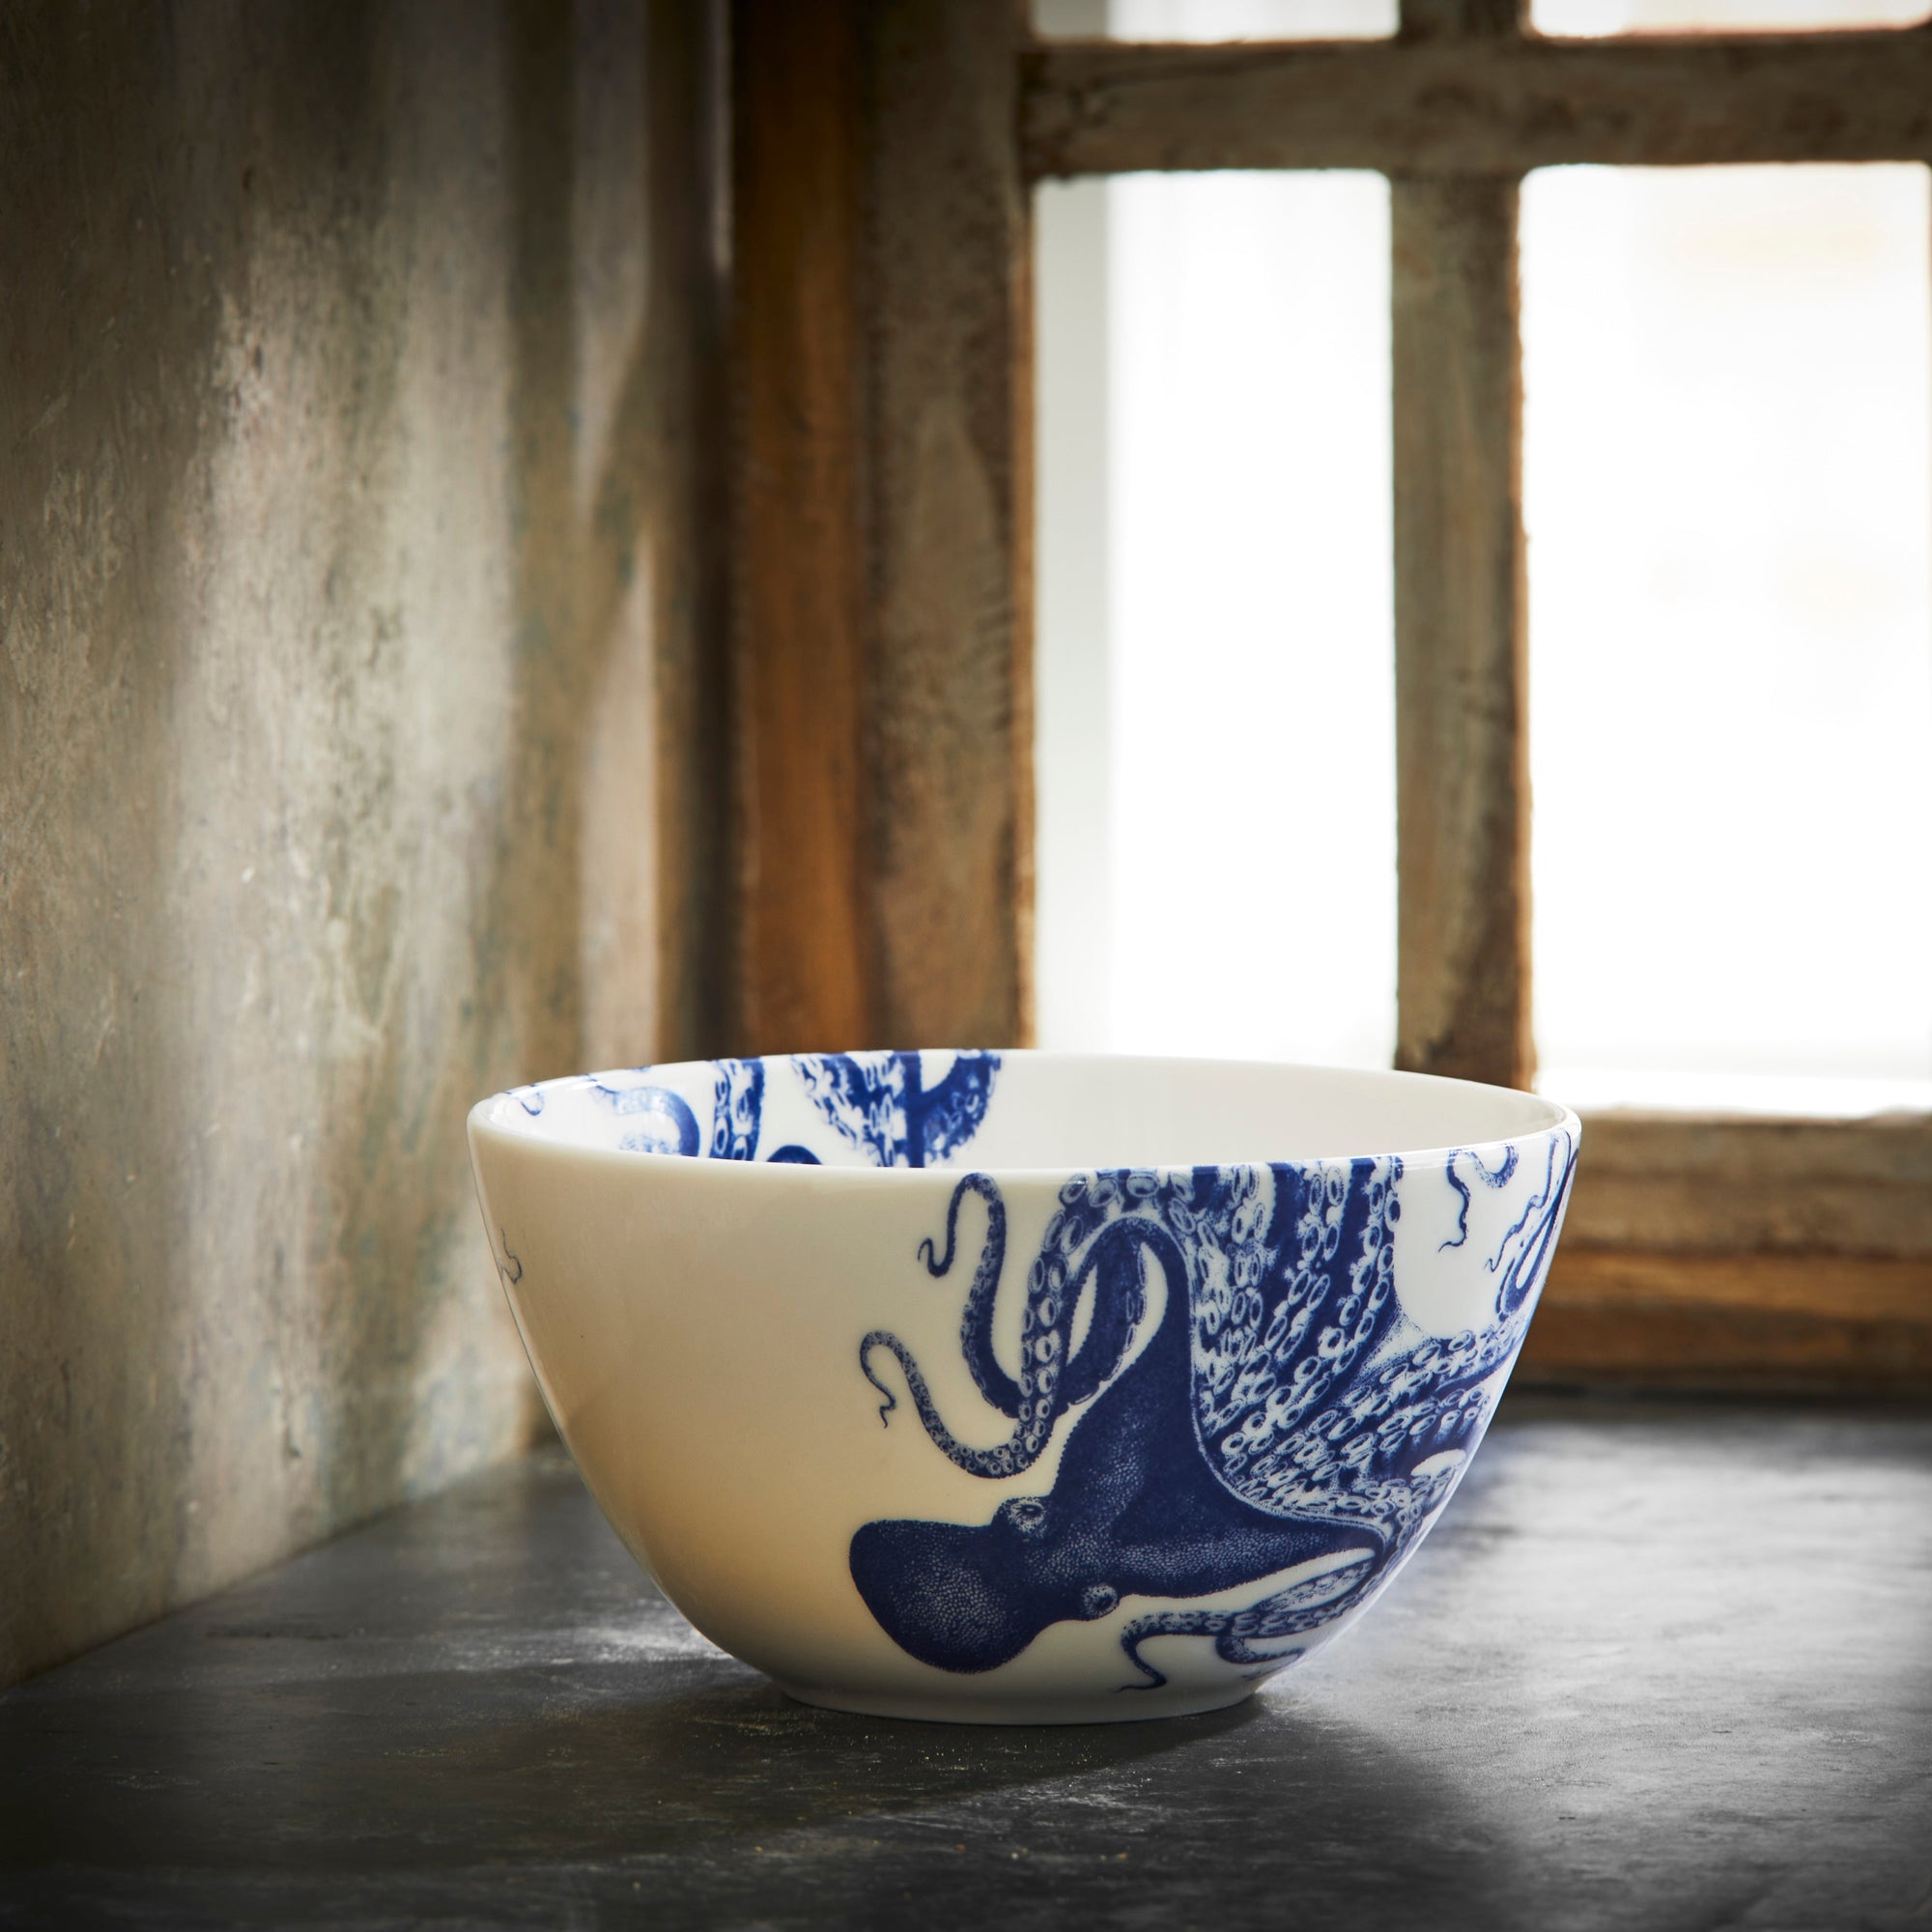 A premium porcelain cereal bowl decorated with a blue octopus design, affectionately known as Lucy the octopus, on the exterior, called the Lucy Cereal Bowl by Caskata.